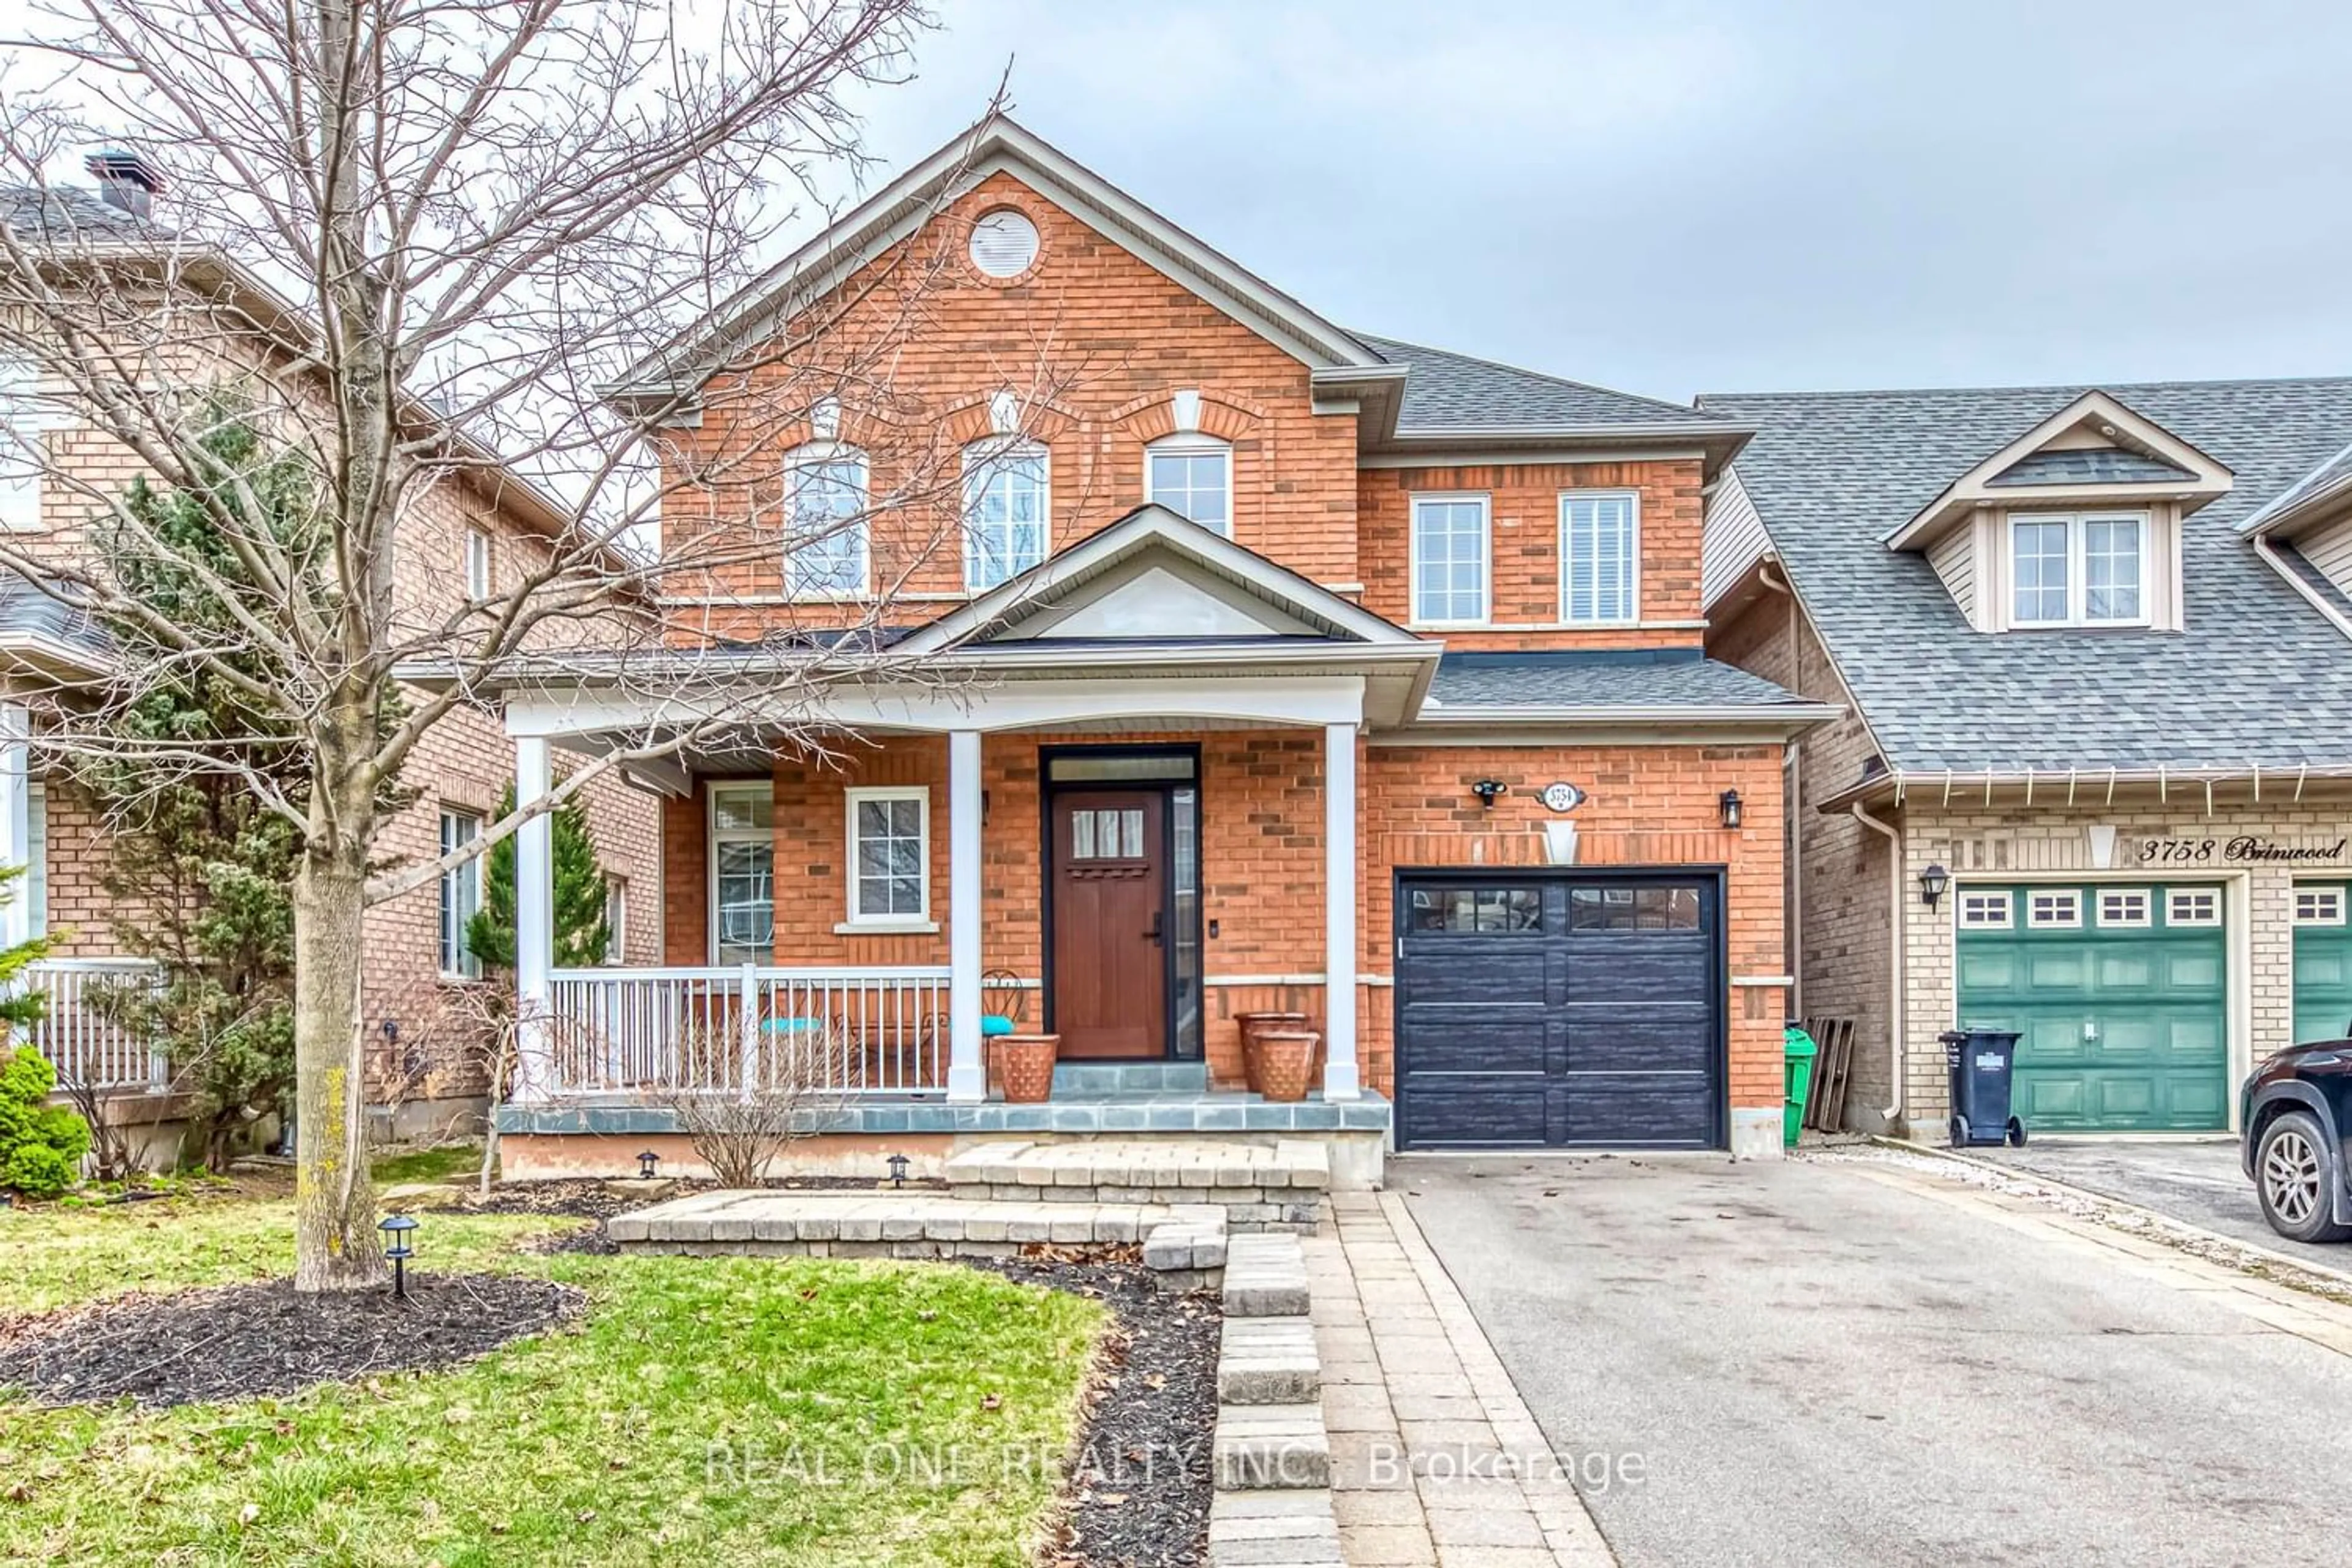 Home with brick exterior material for 3754 Brinwood Gate, Mississauga Ontario L5M 7G9